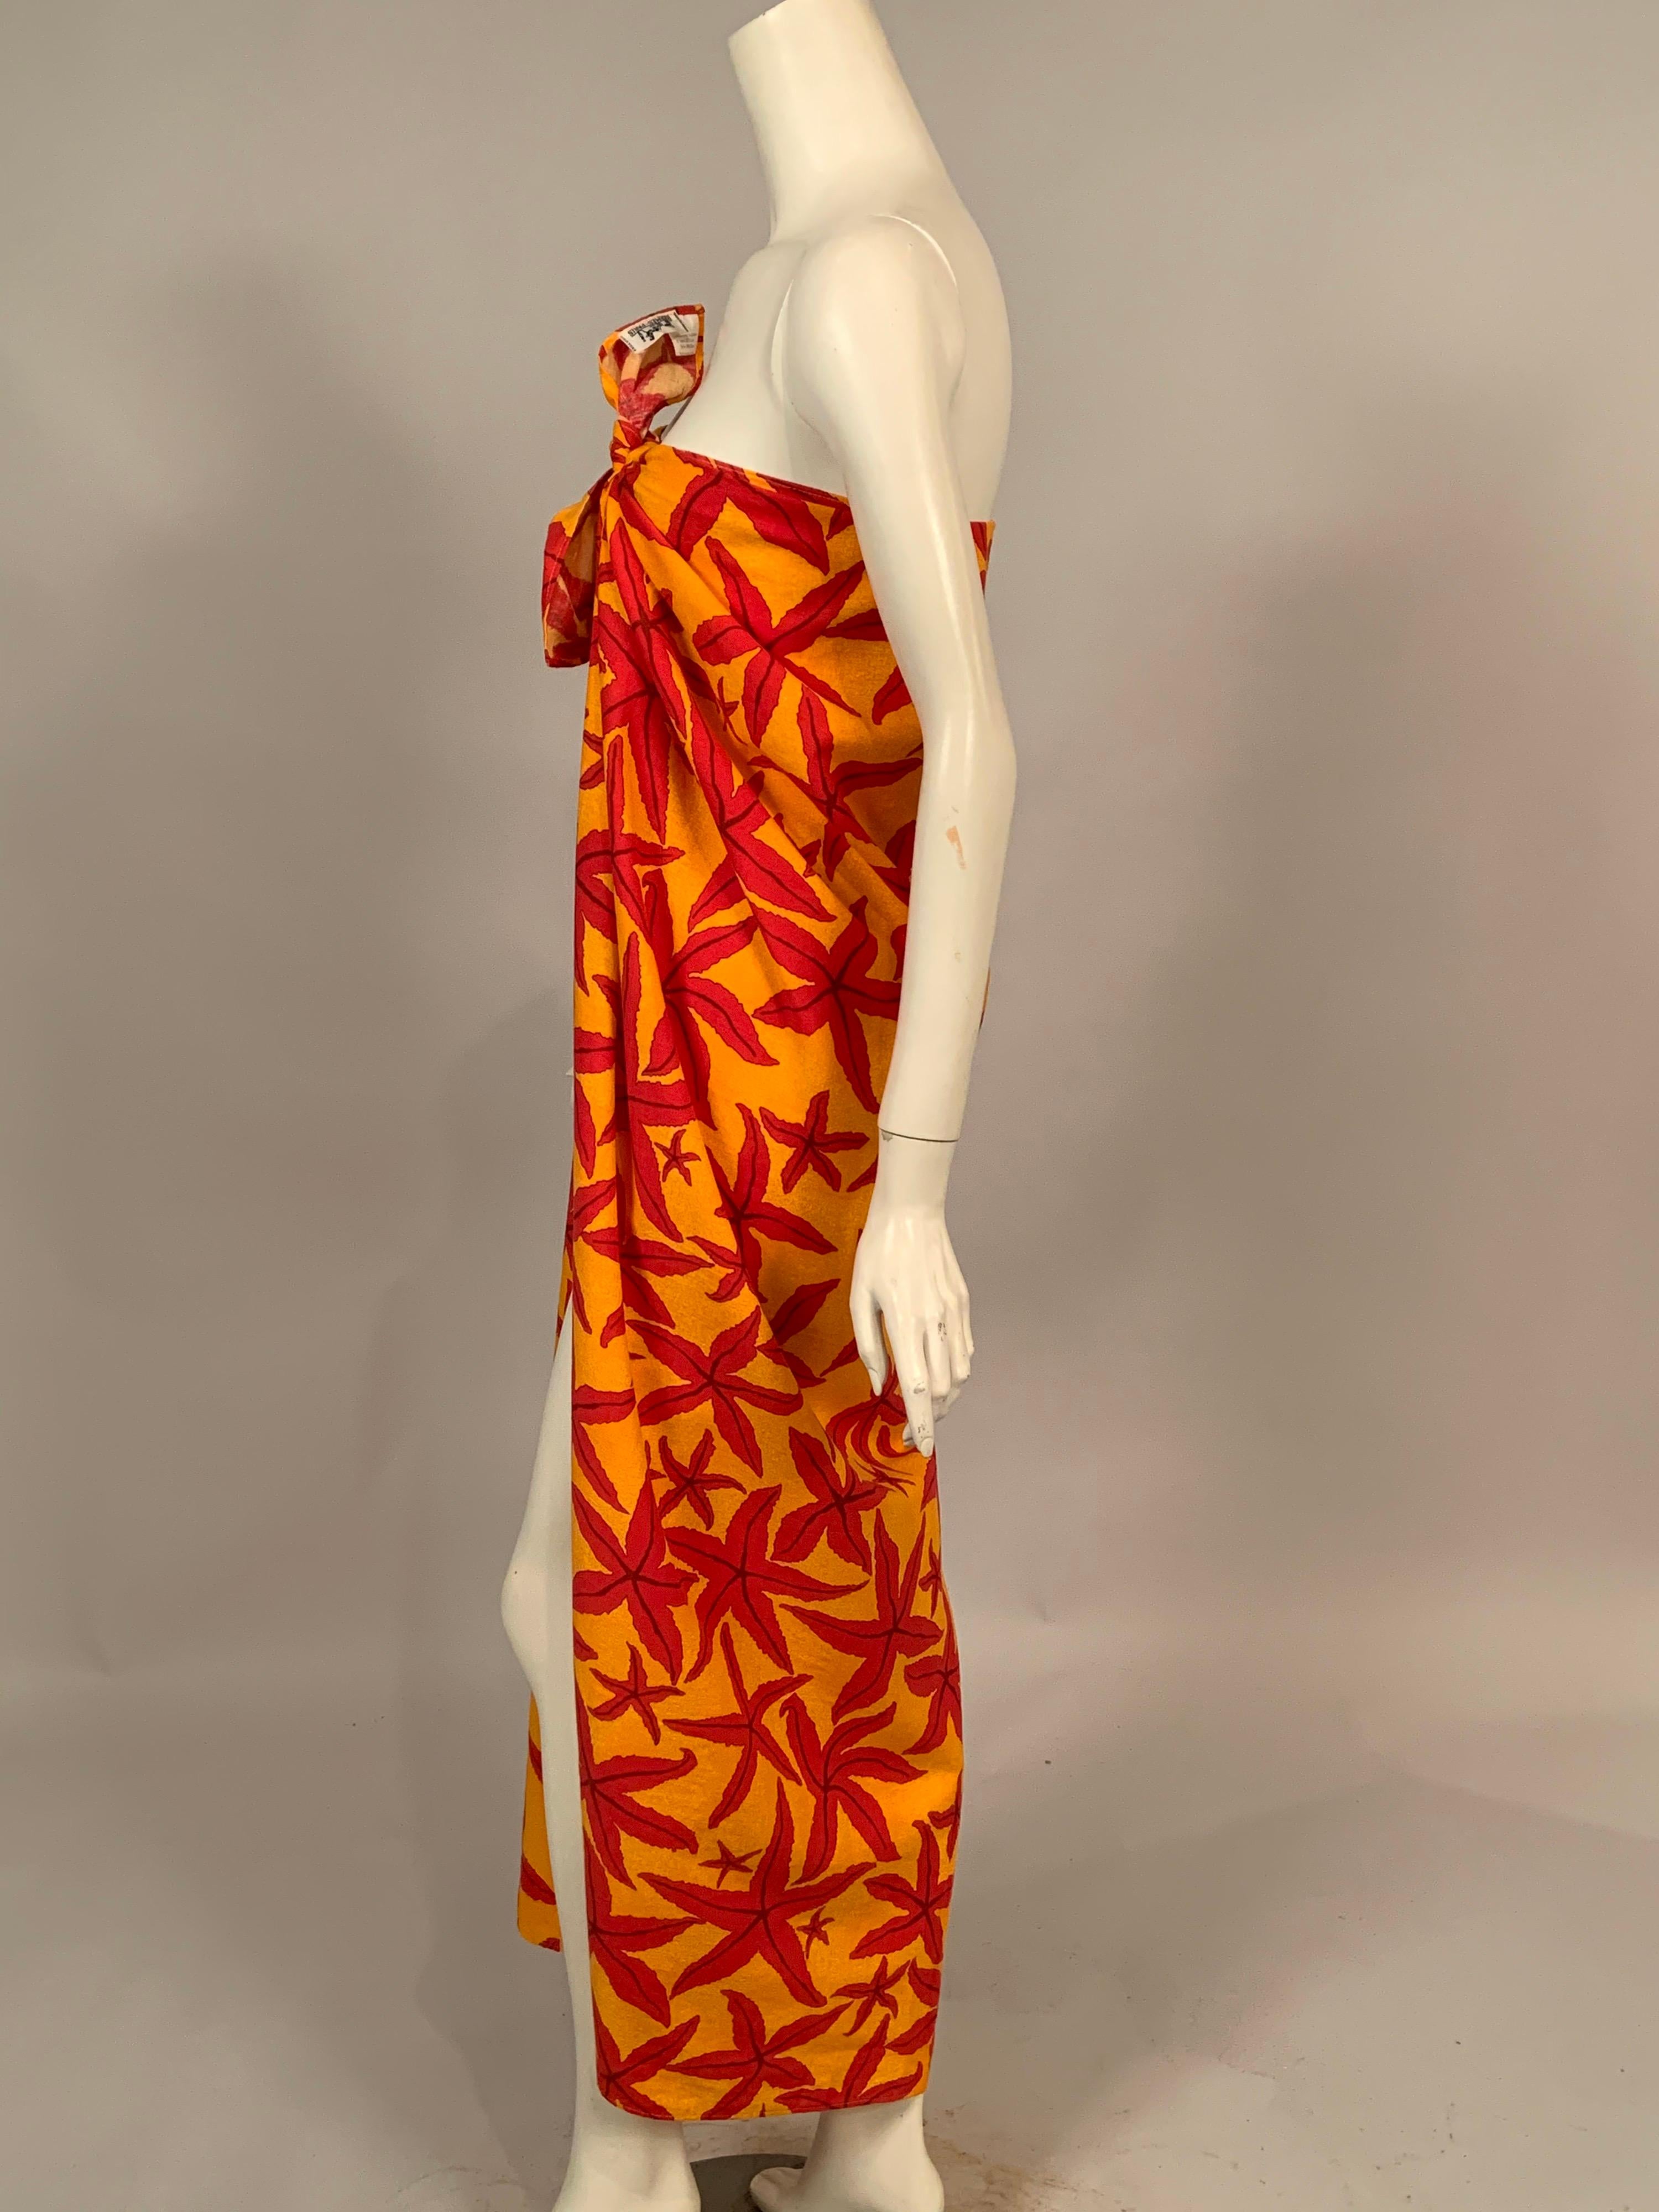 Hermes, Paris Tropical Starfish Patterned Red and Yellow Pareo, Wrap or Shawl 2